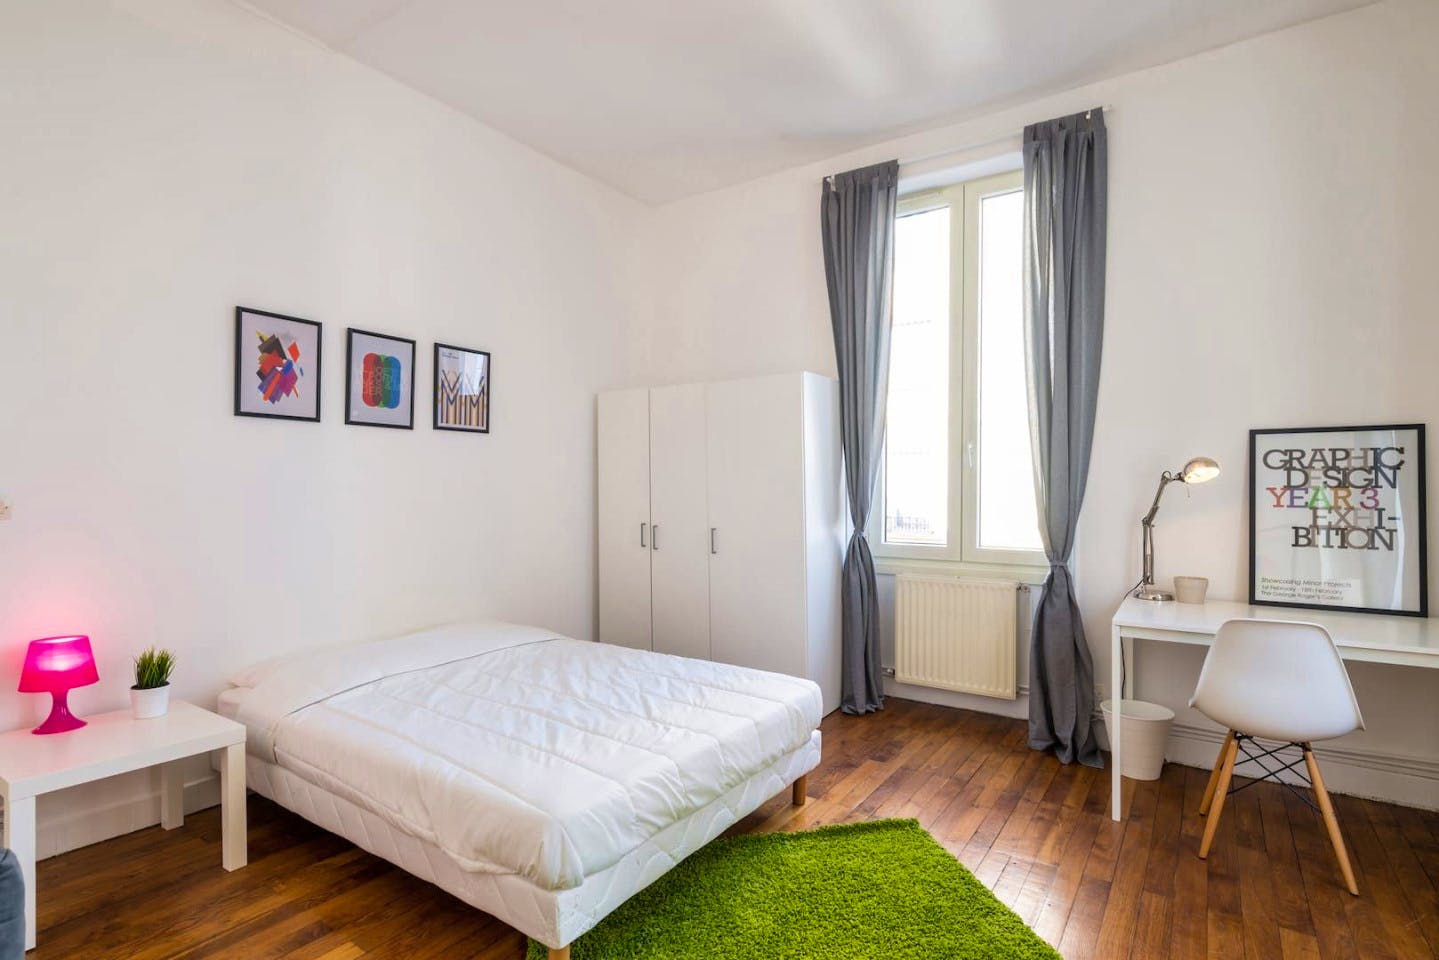 8-Bed Apartment on Rue Villebois Mareuil